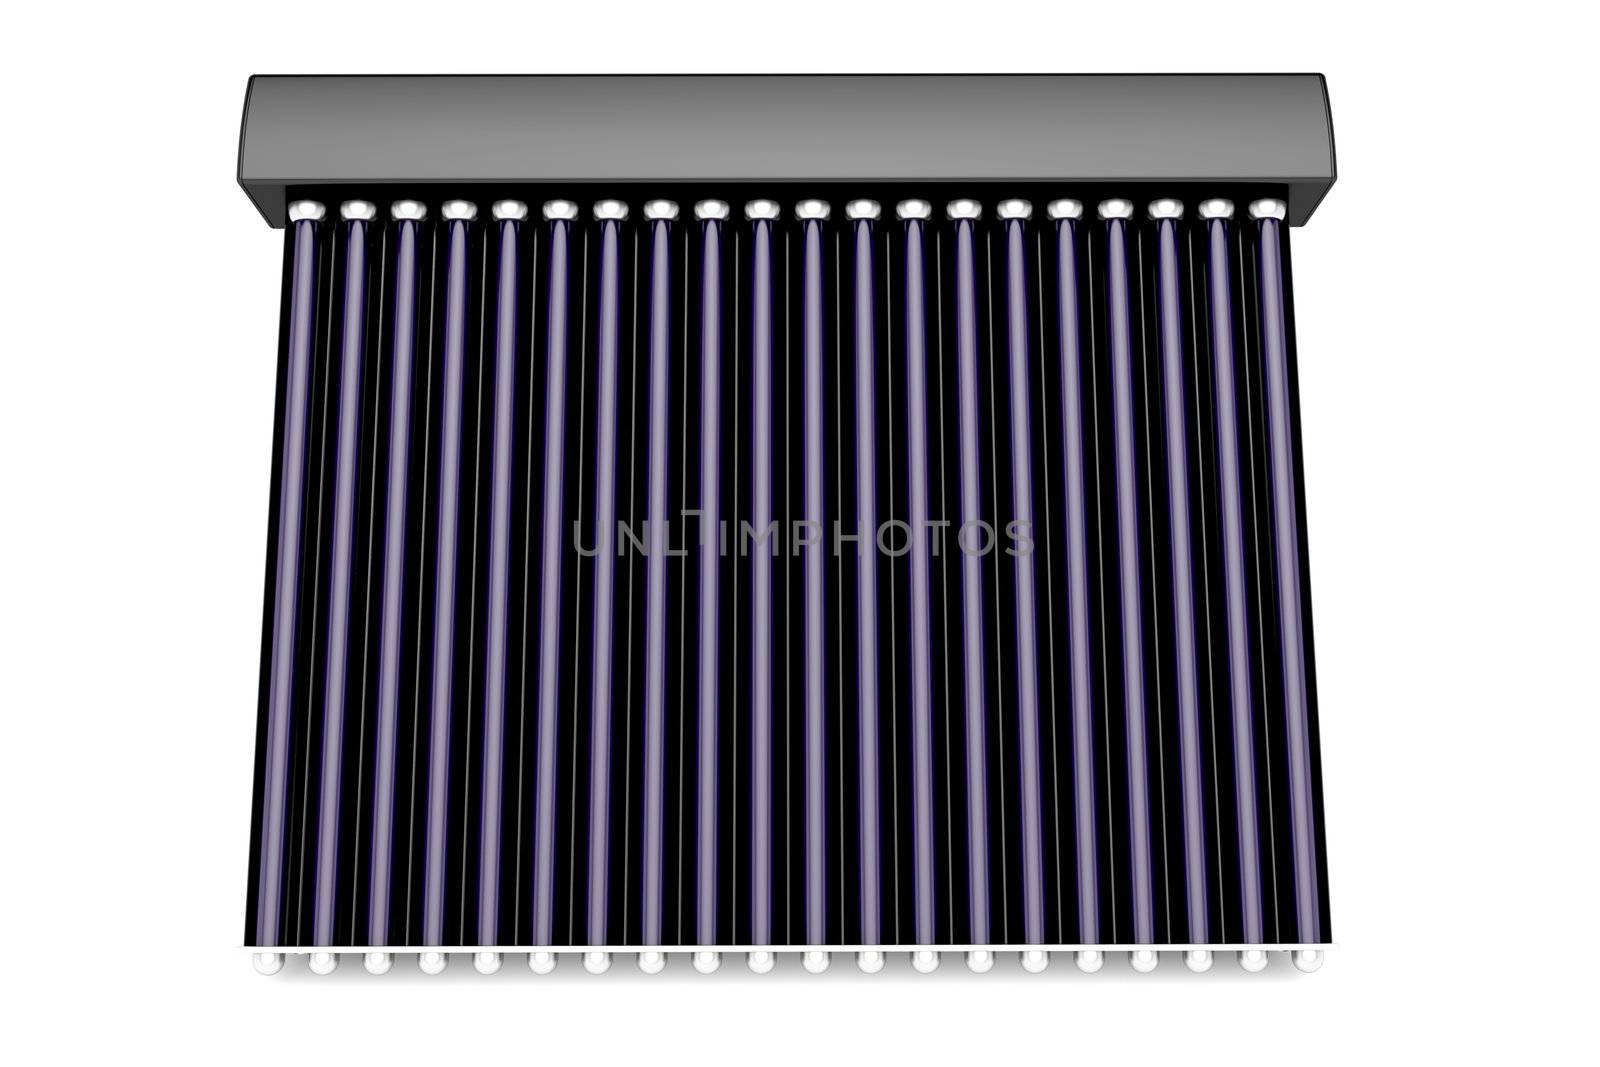 Front view of solar water heater on white background